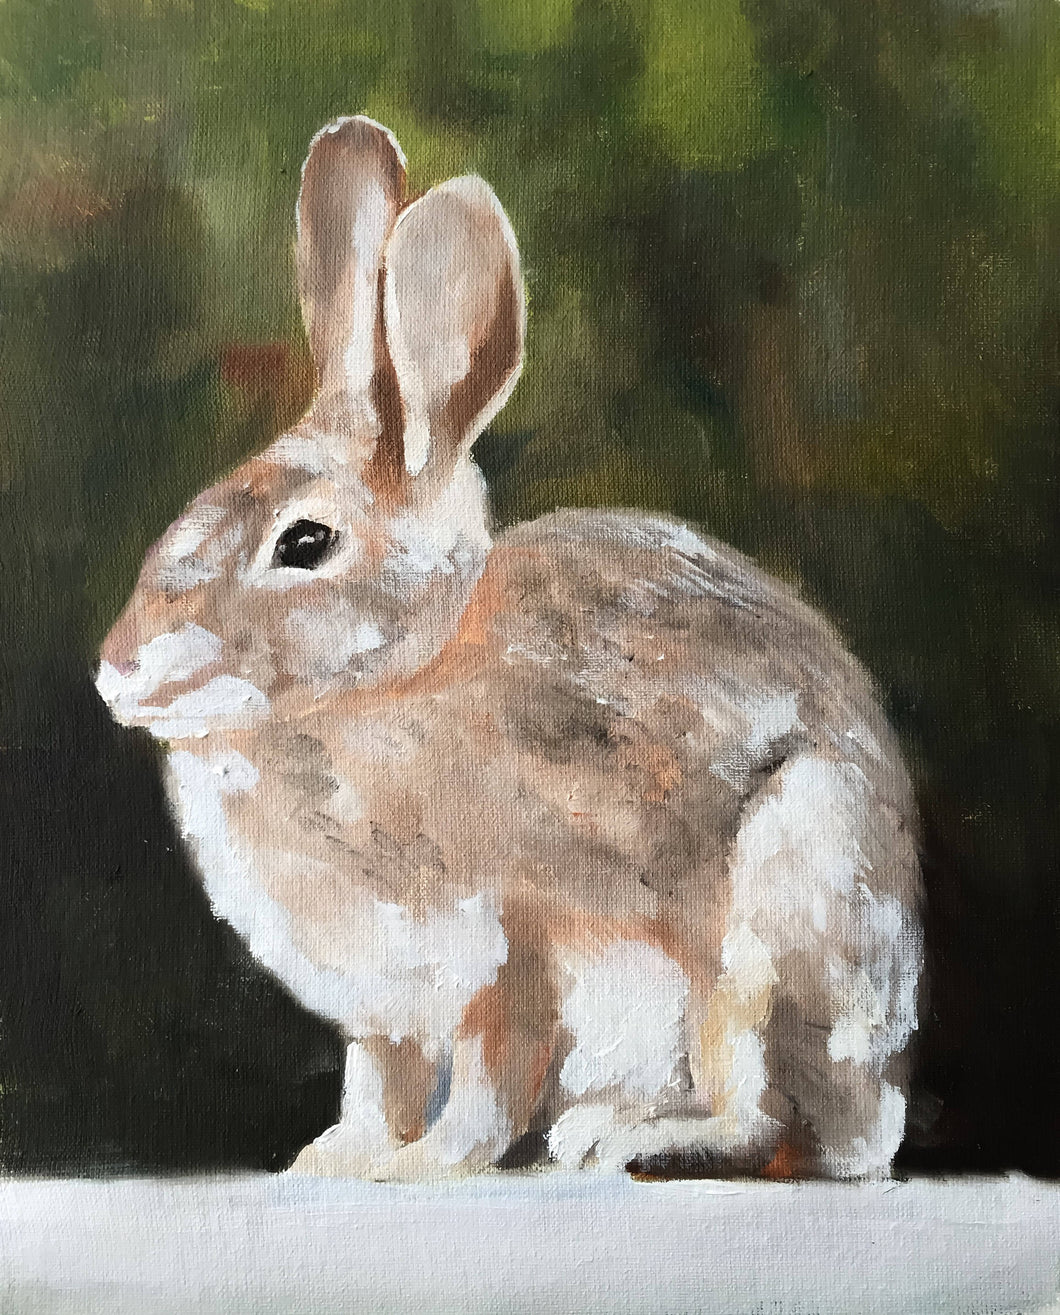 Rabbit - Painting - Poster - Wall art - Canvas Print - Fine Art - from original oil painting by James Coates